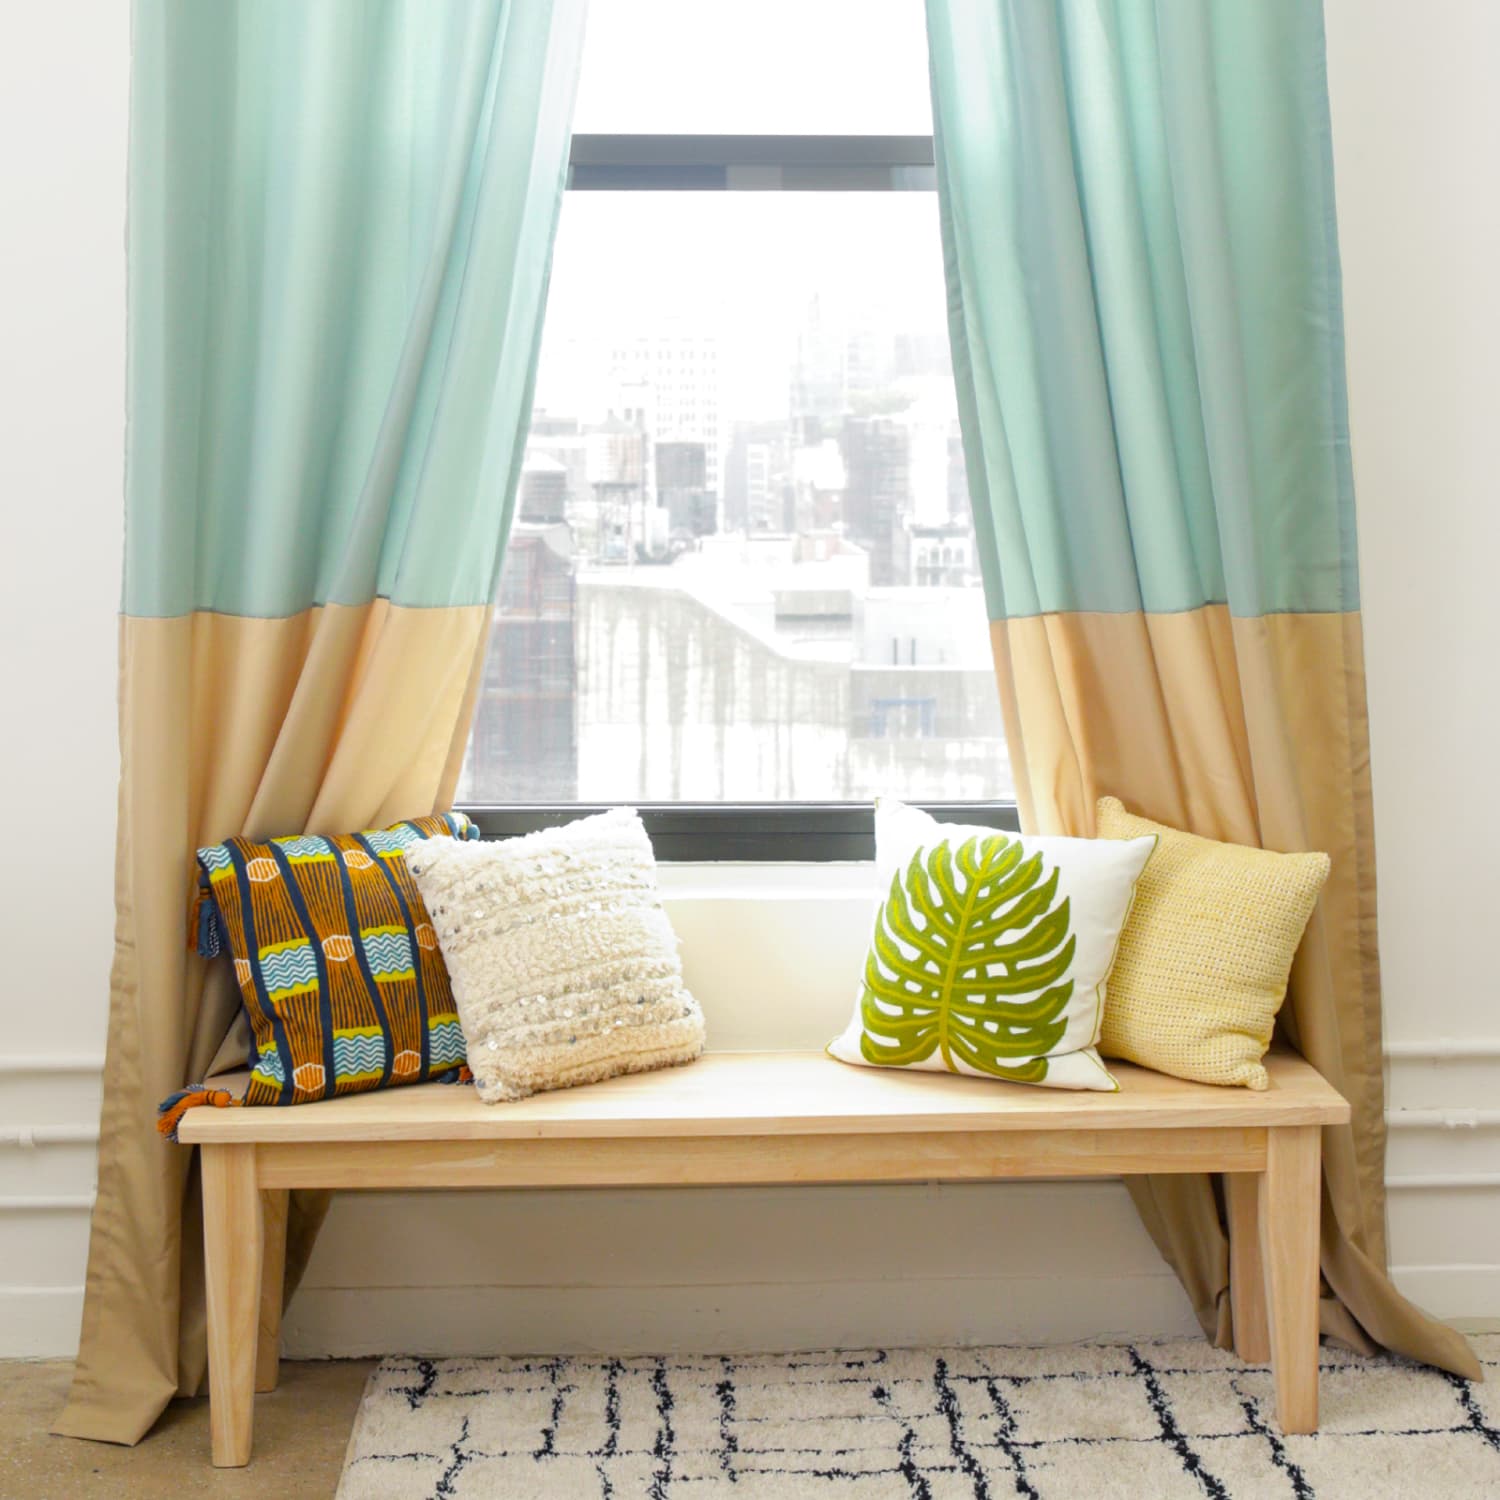 How to Hang Curtains - Do's and Don'ts of Hanging Curtains